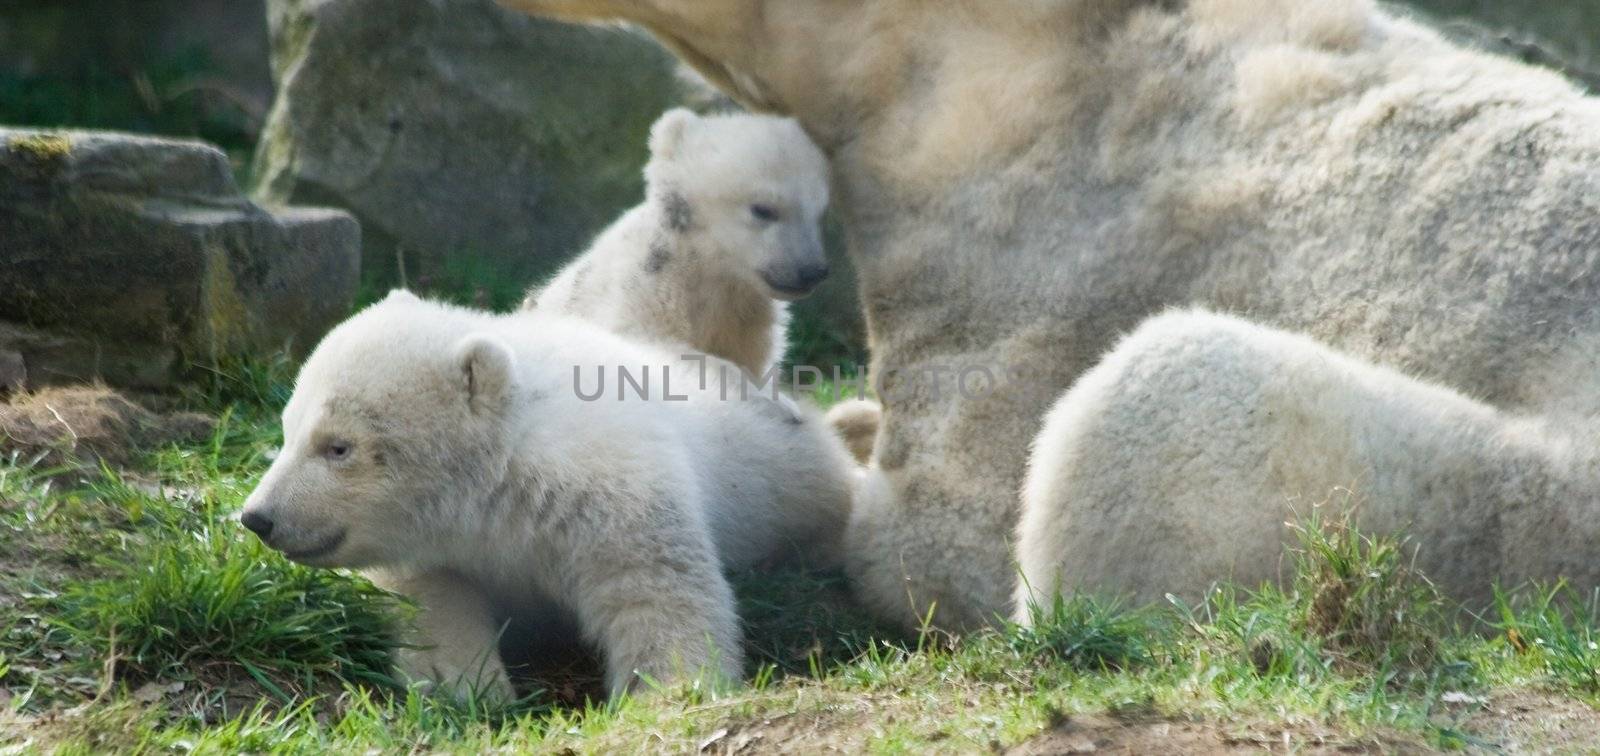 Three polar bears - mother and two kids